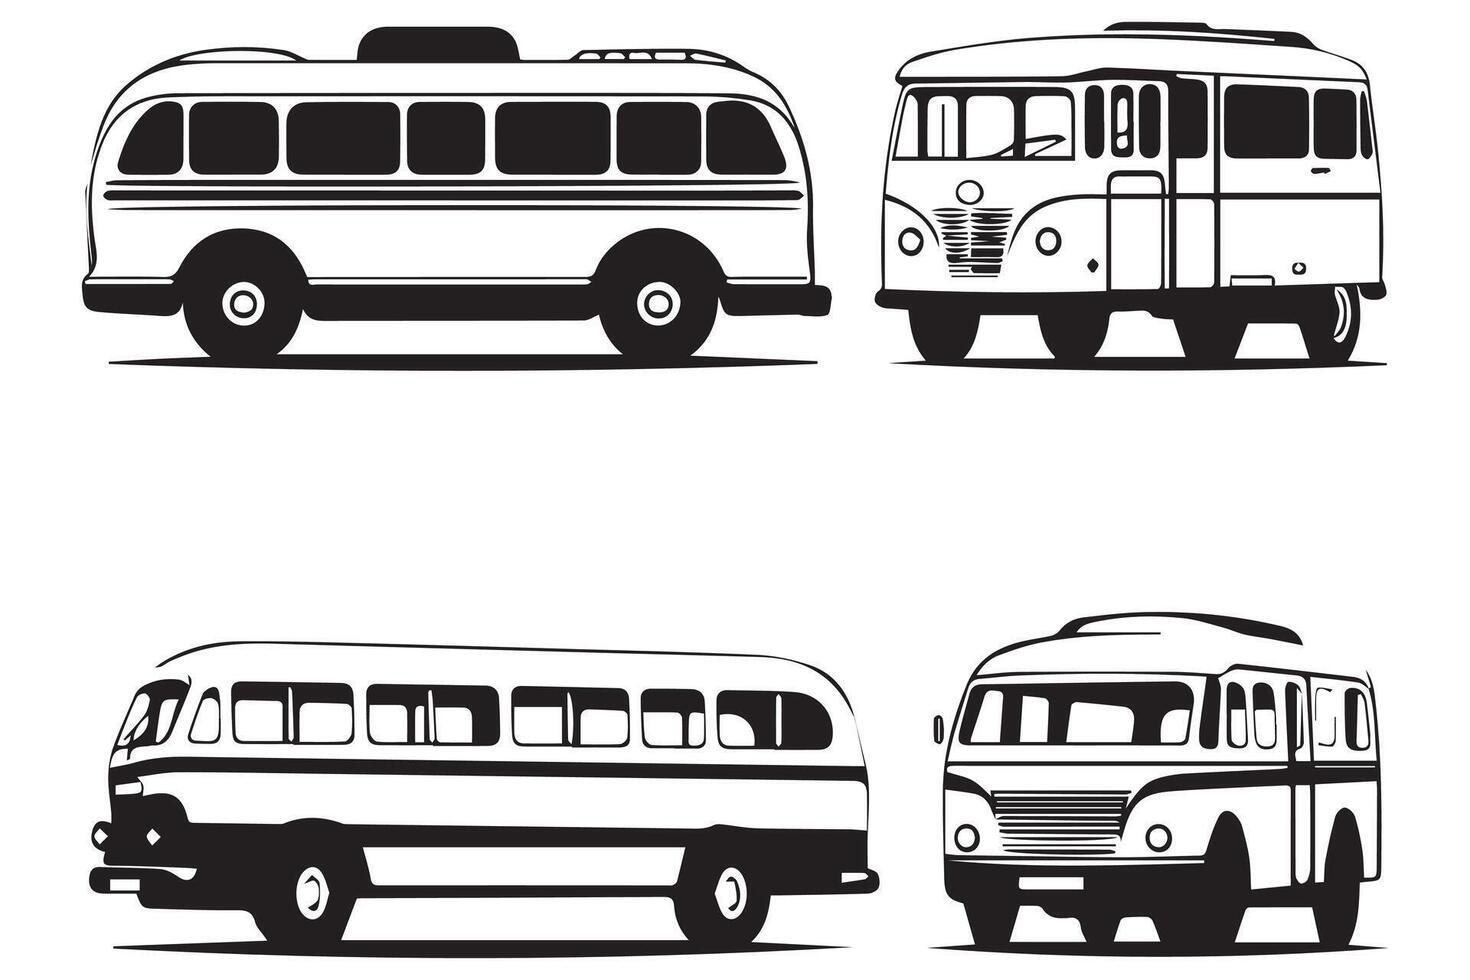 Bus icons set on white background vector